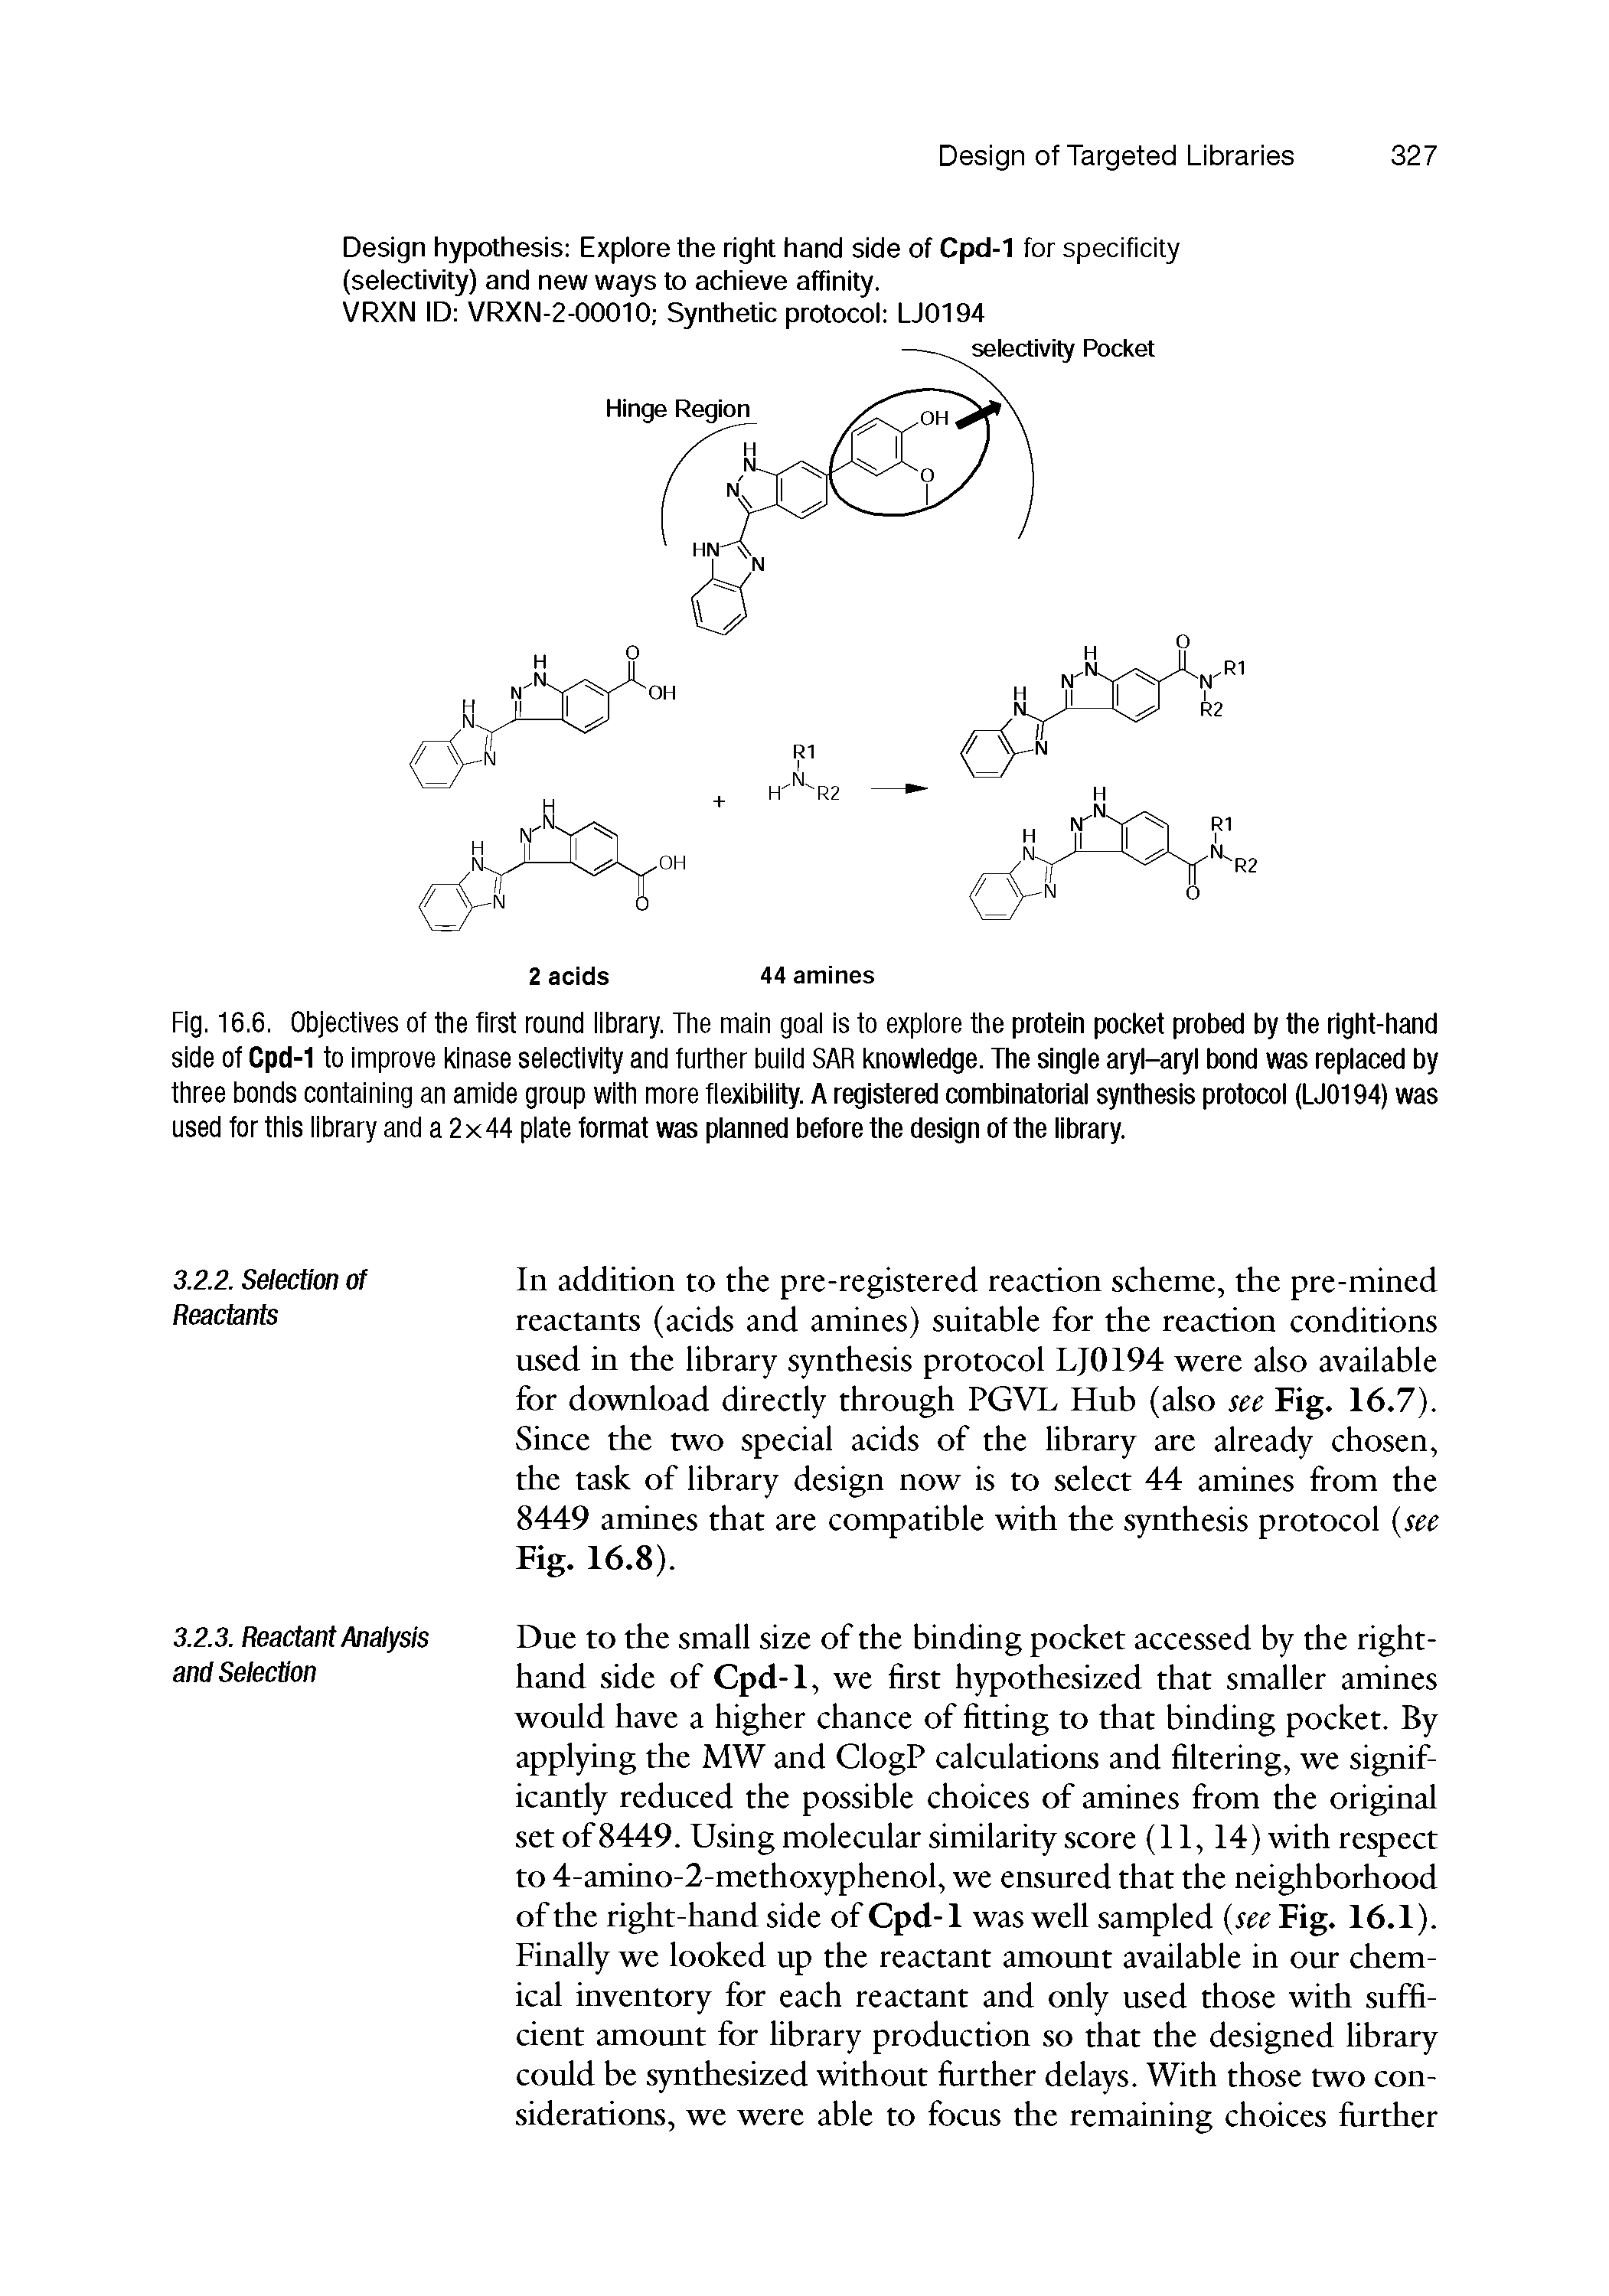 Fig. 16.6. Objectives of the first round library. The main goal is to explore the protein pocket probed by the right-hand side of Cpd-1 to improve kinase selectivity and further build SAR knowledge. The single aryl-aryl bond was replaced by three bonds containing an amide group with more flexibility. A registered combinatorial synthesis protocol (LJ0194) was used for this library and a 2x44 plate format was planned before the design of the library.